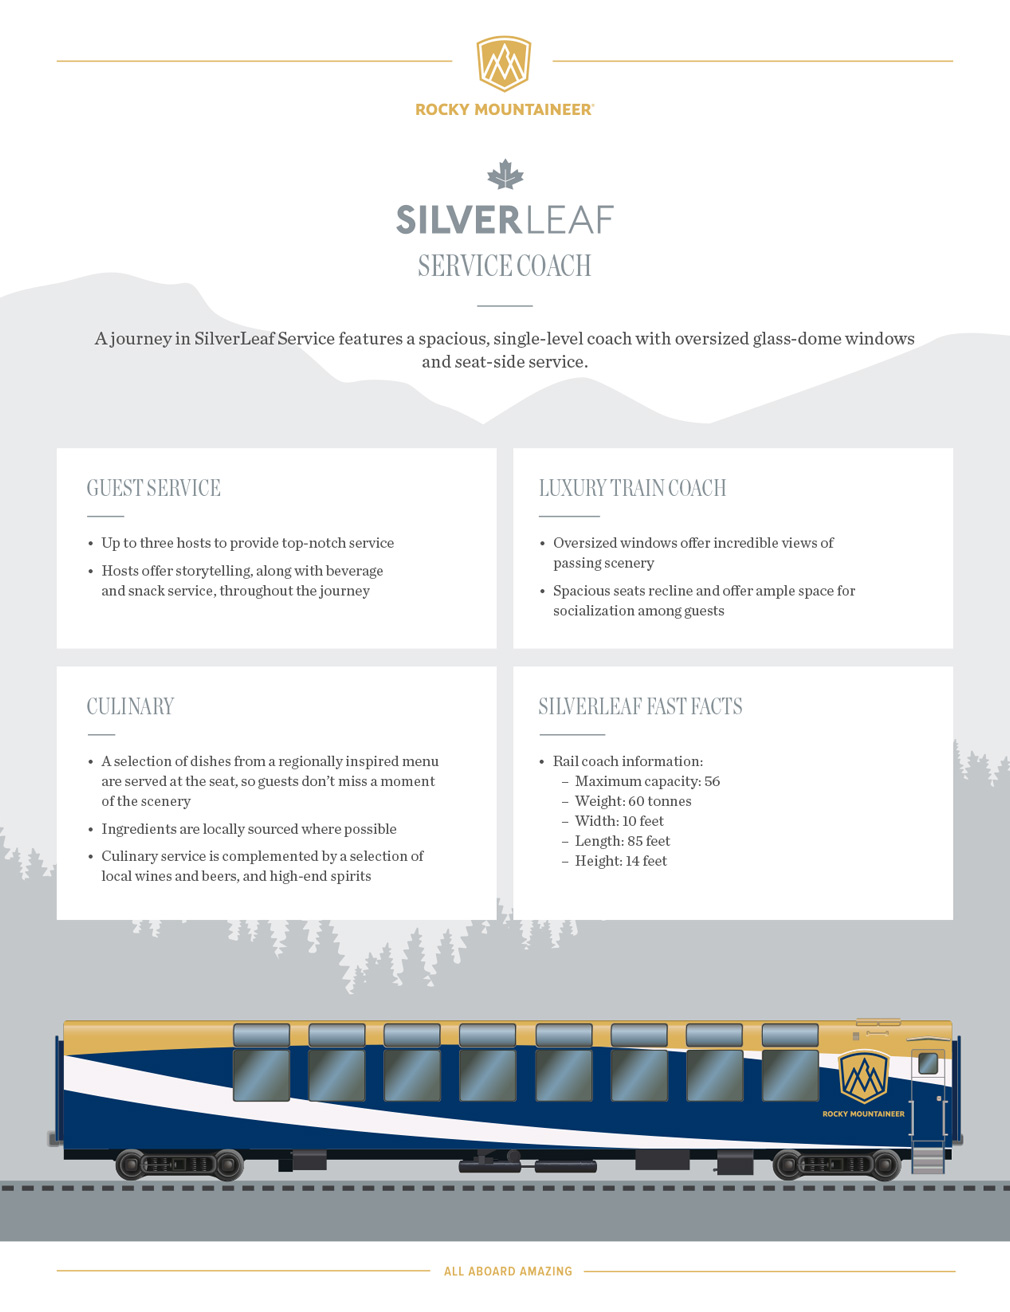 Rocky Mountaineer Silver Leaf Service